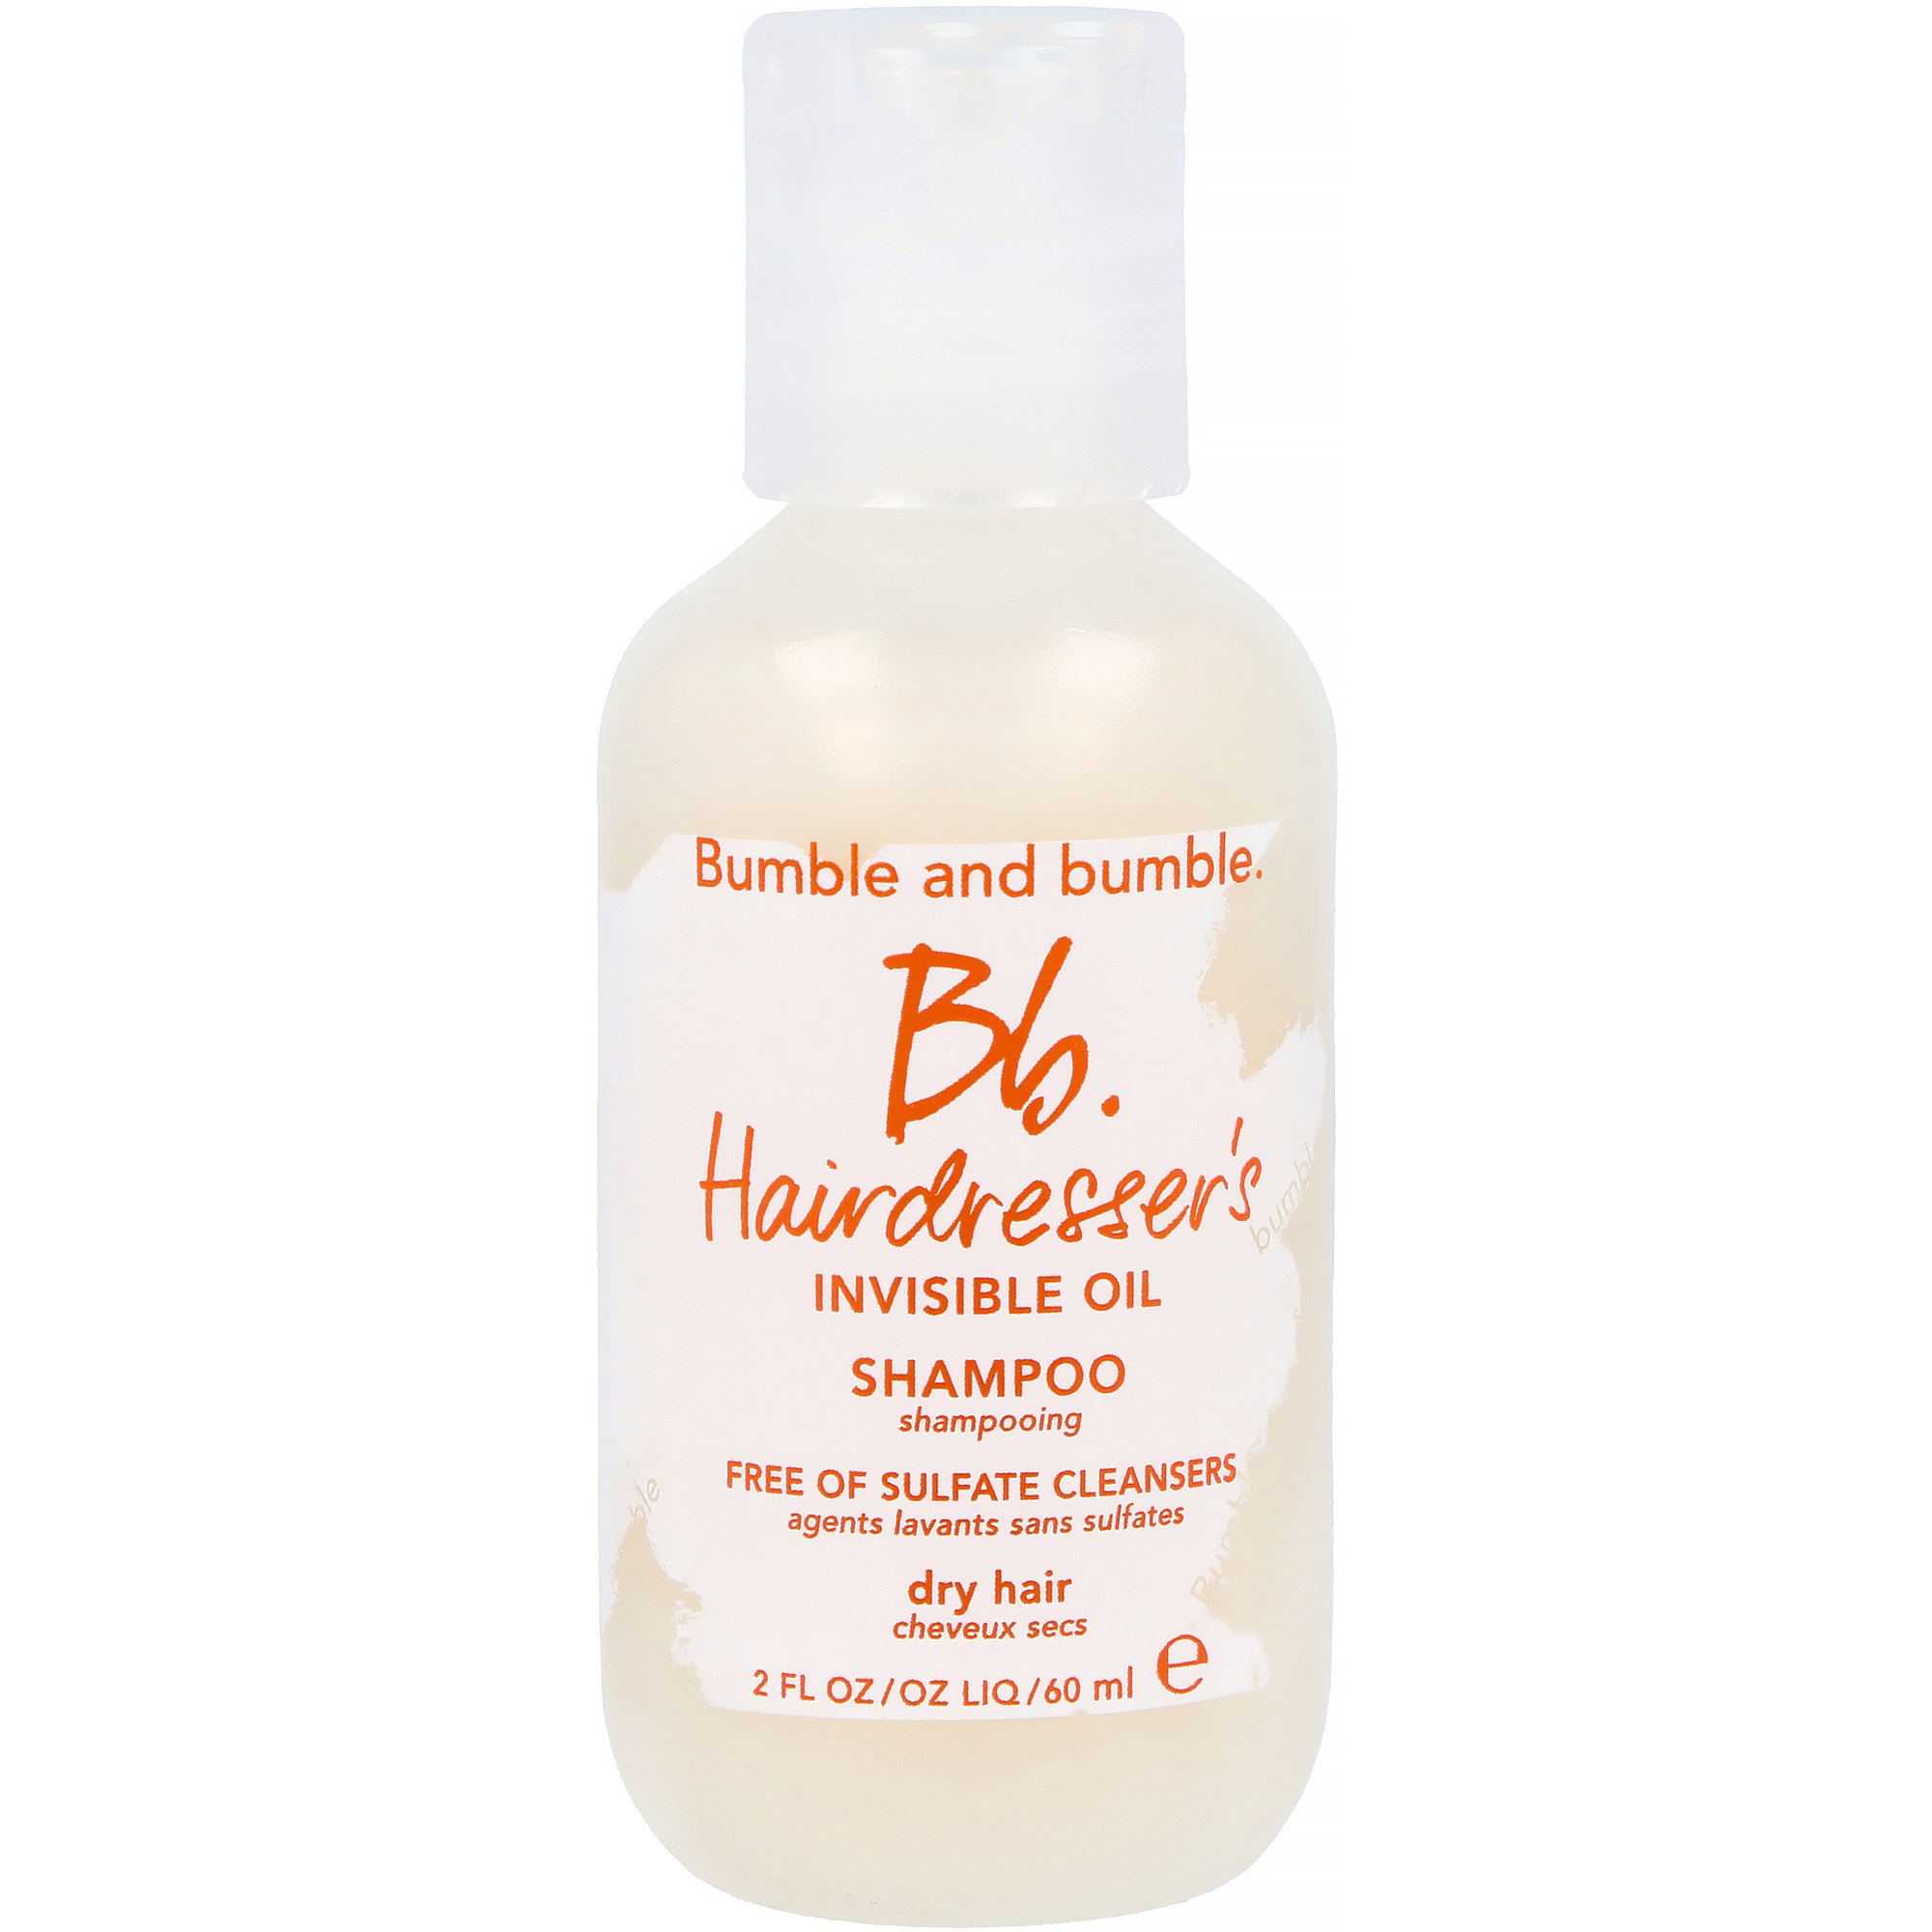 Bilde av Bumble And Bumble Hairdresser's Invisible Oil Shampoo 60 Ml